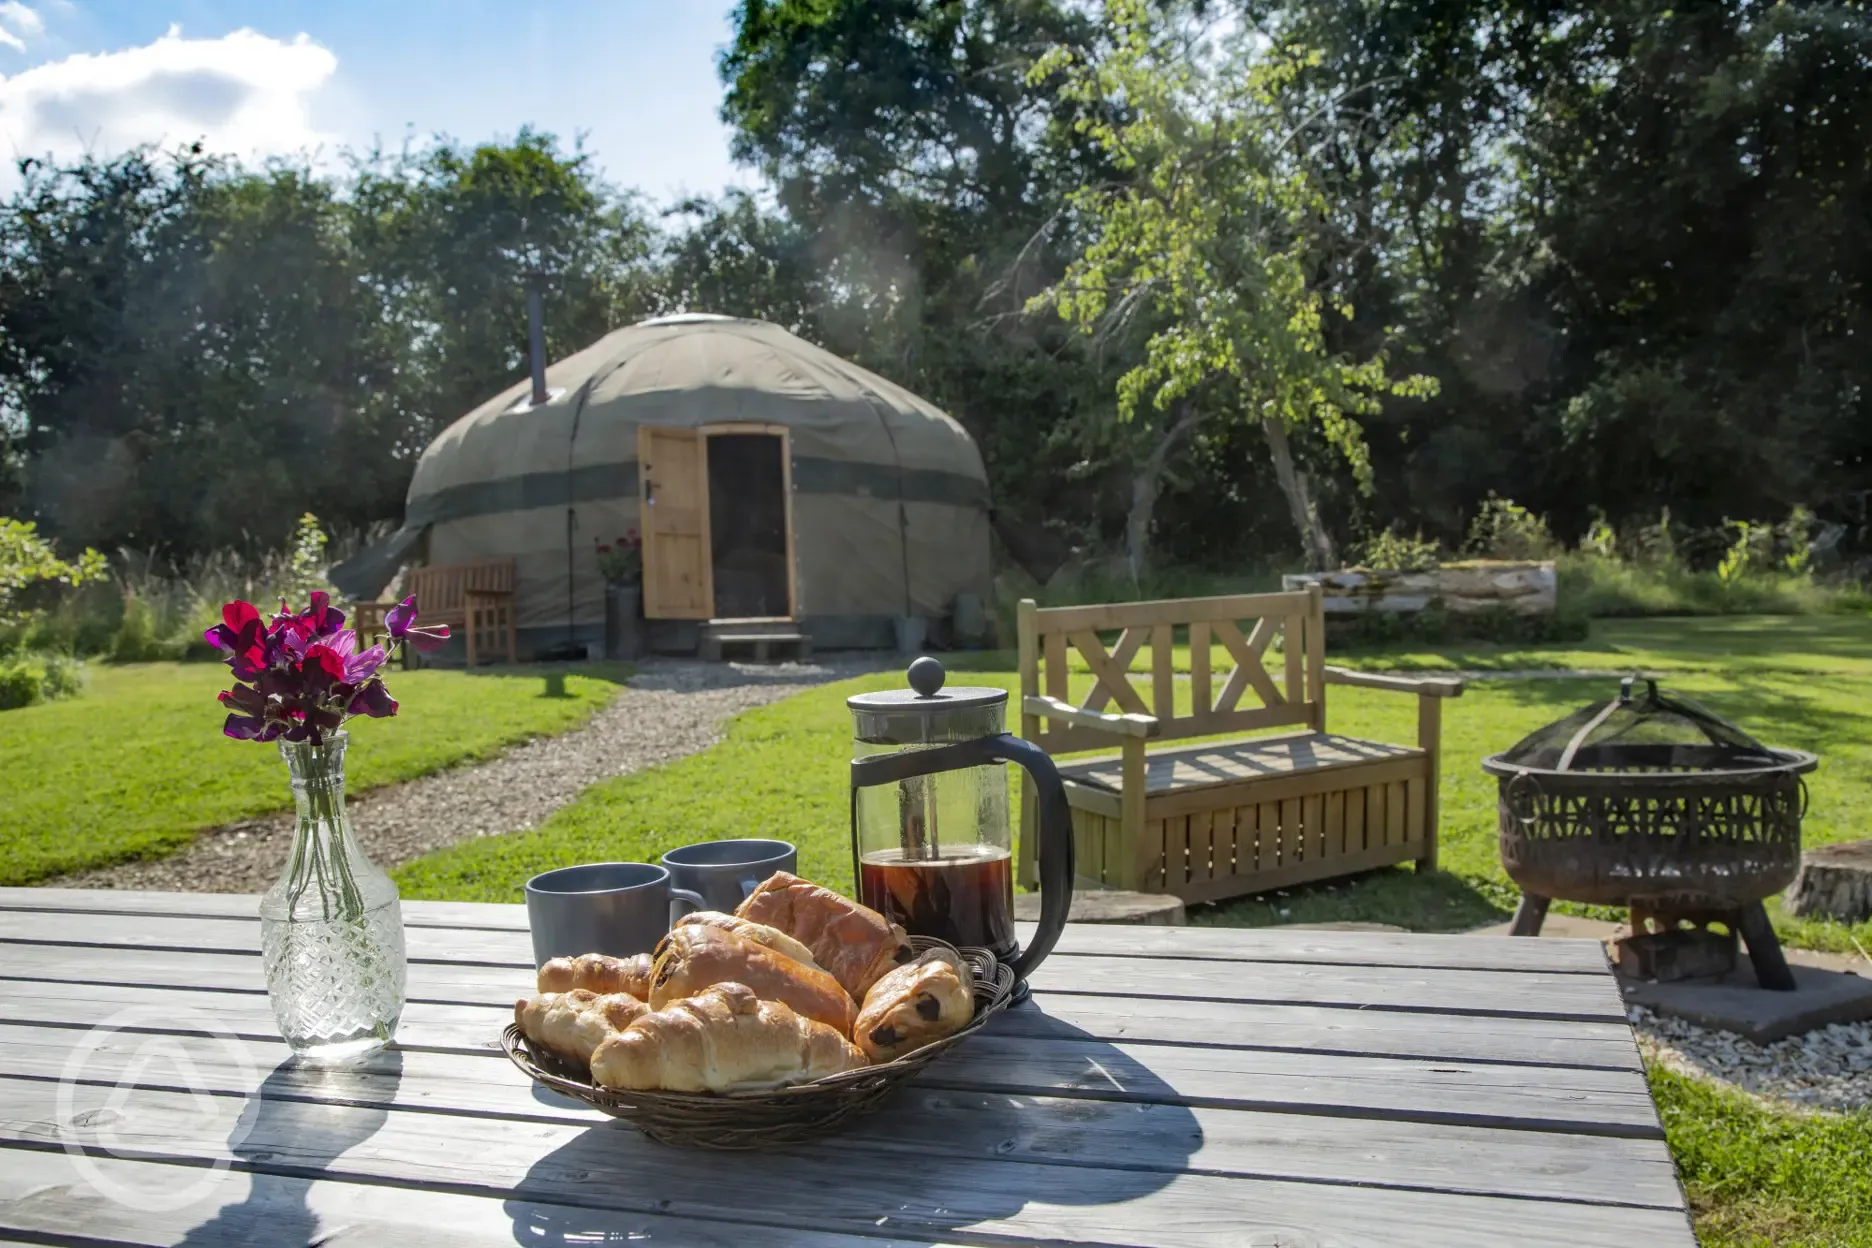 Alfresco breakfast of croissants and coffee outside the yurt